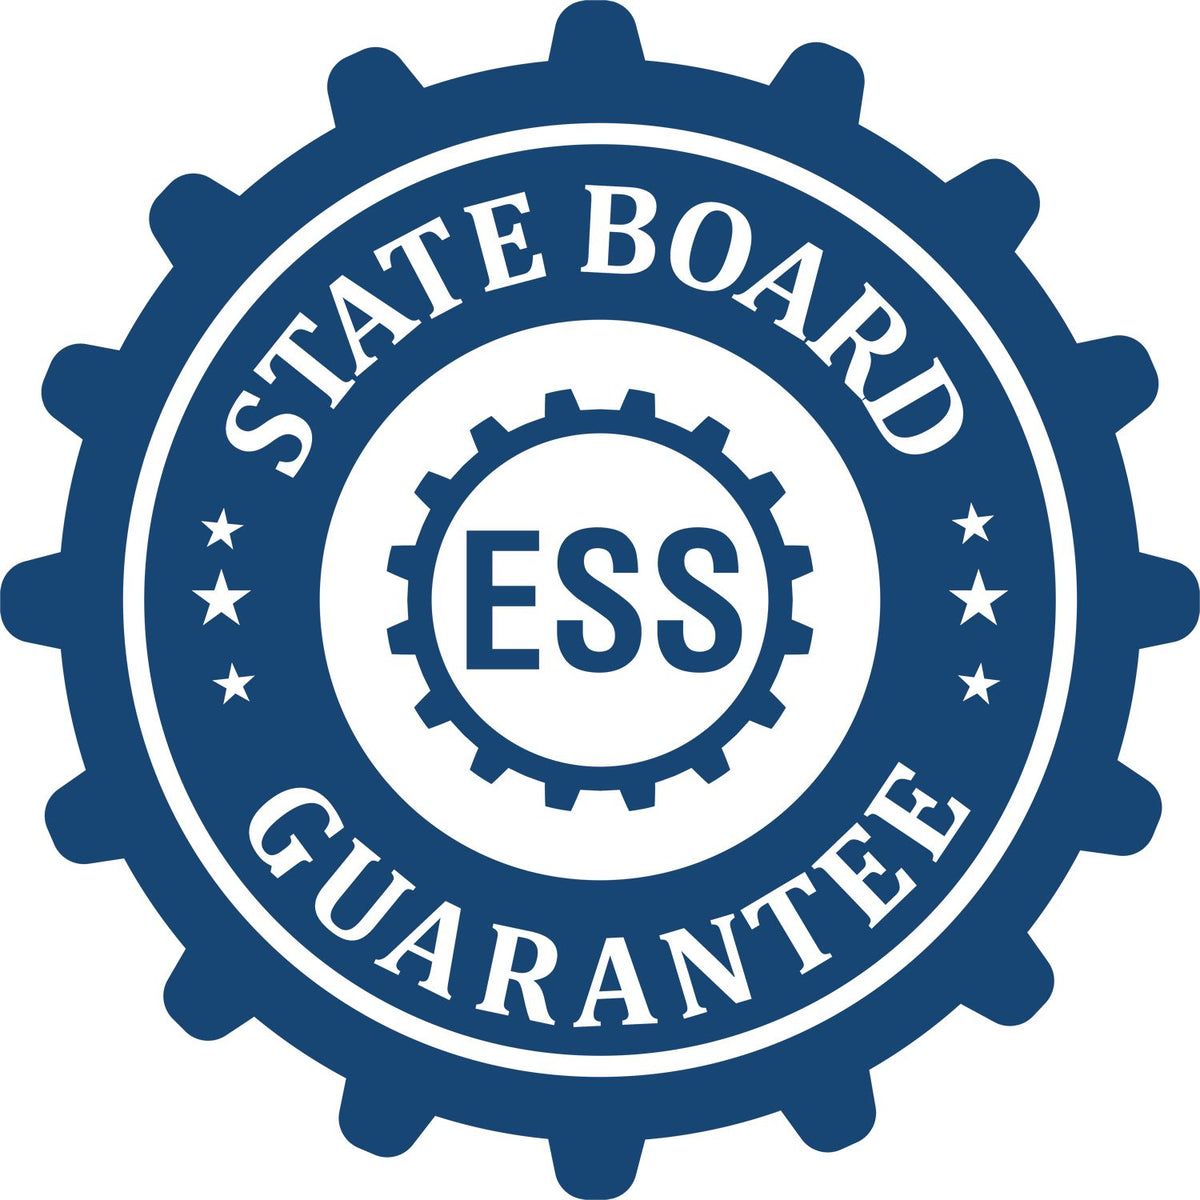 An emblem in a gear shape illustrating a state board guarantee for the Digital Illinois Landscape Architect Stamp product.